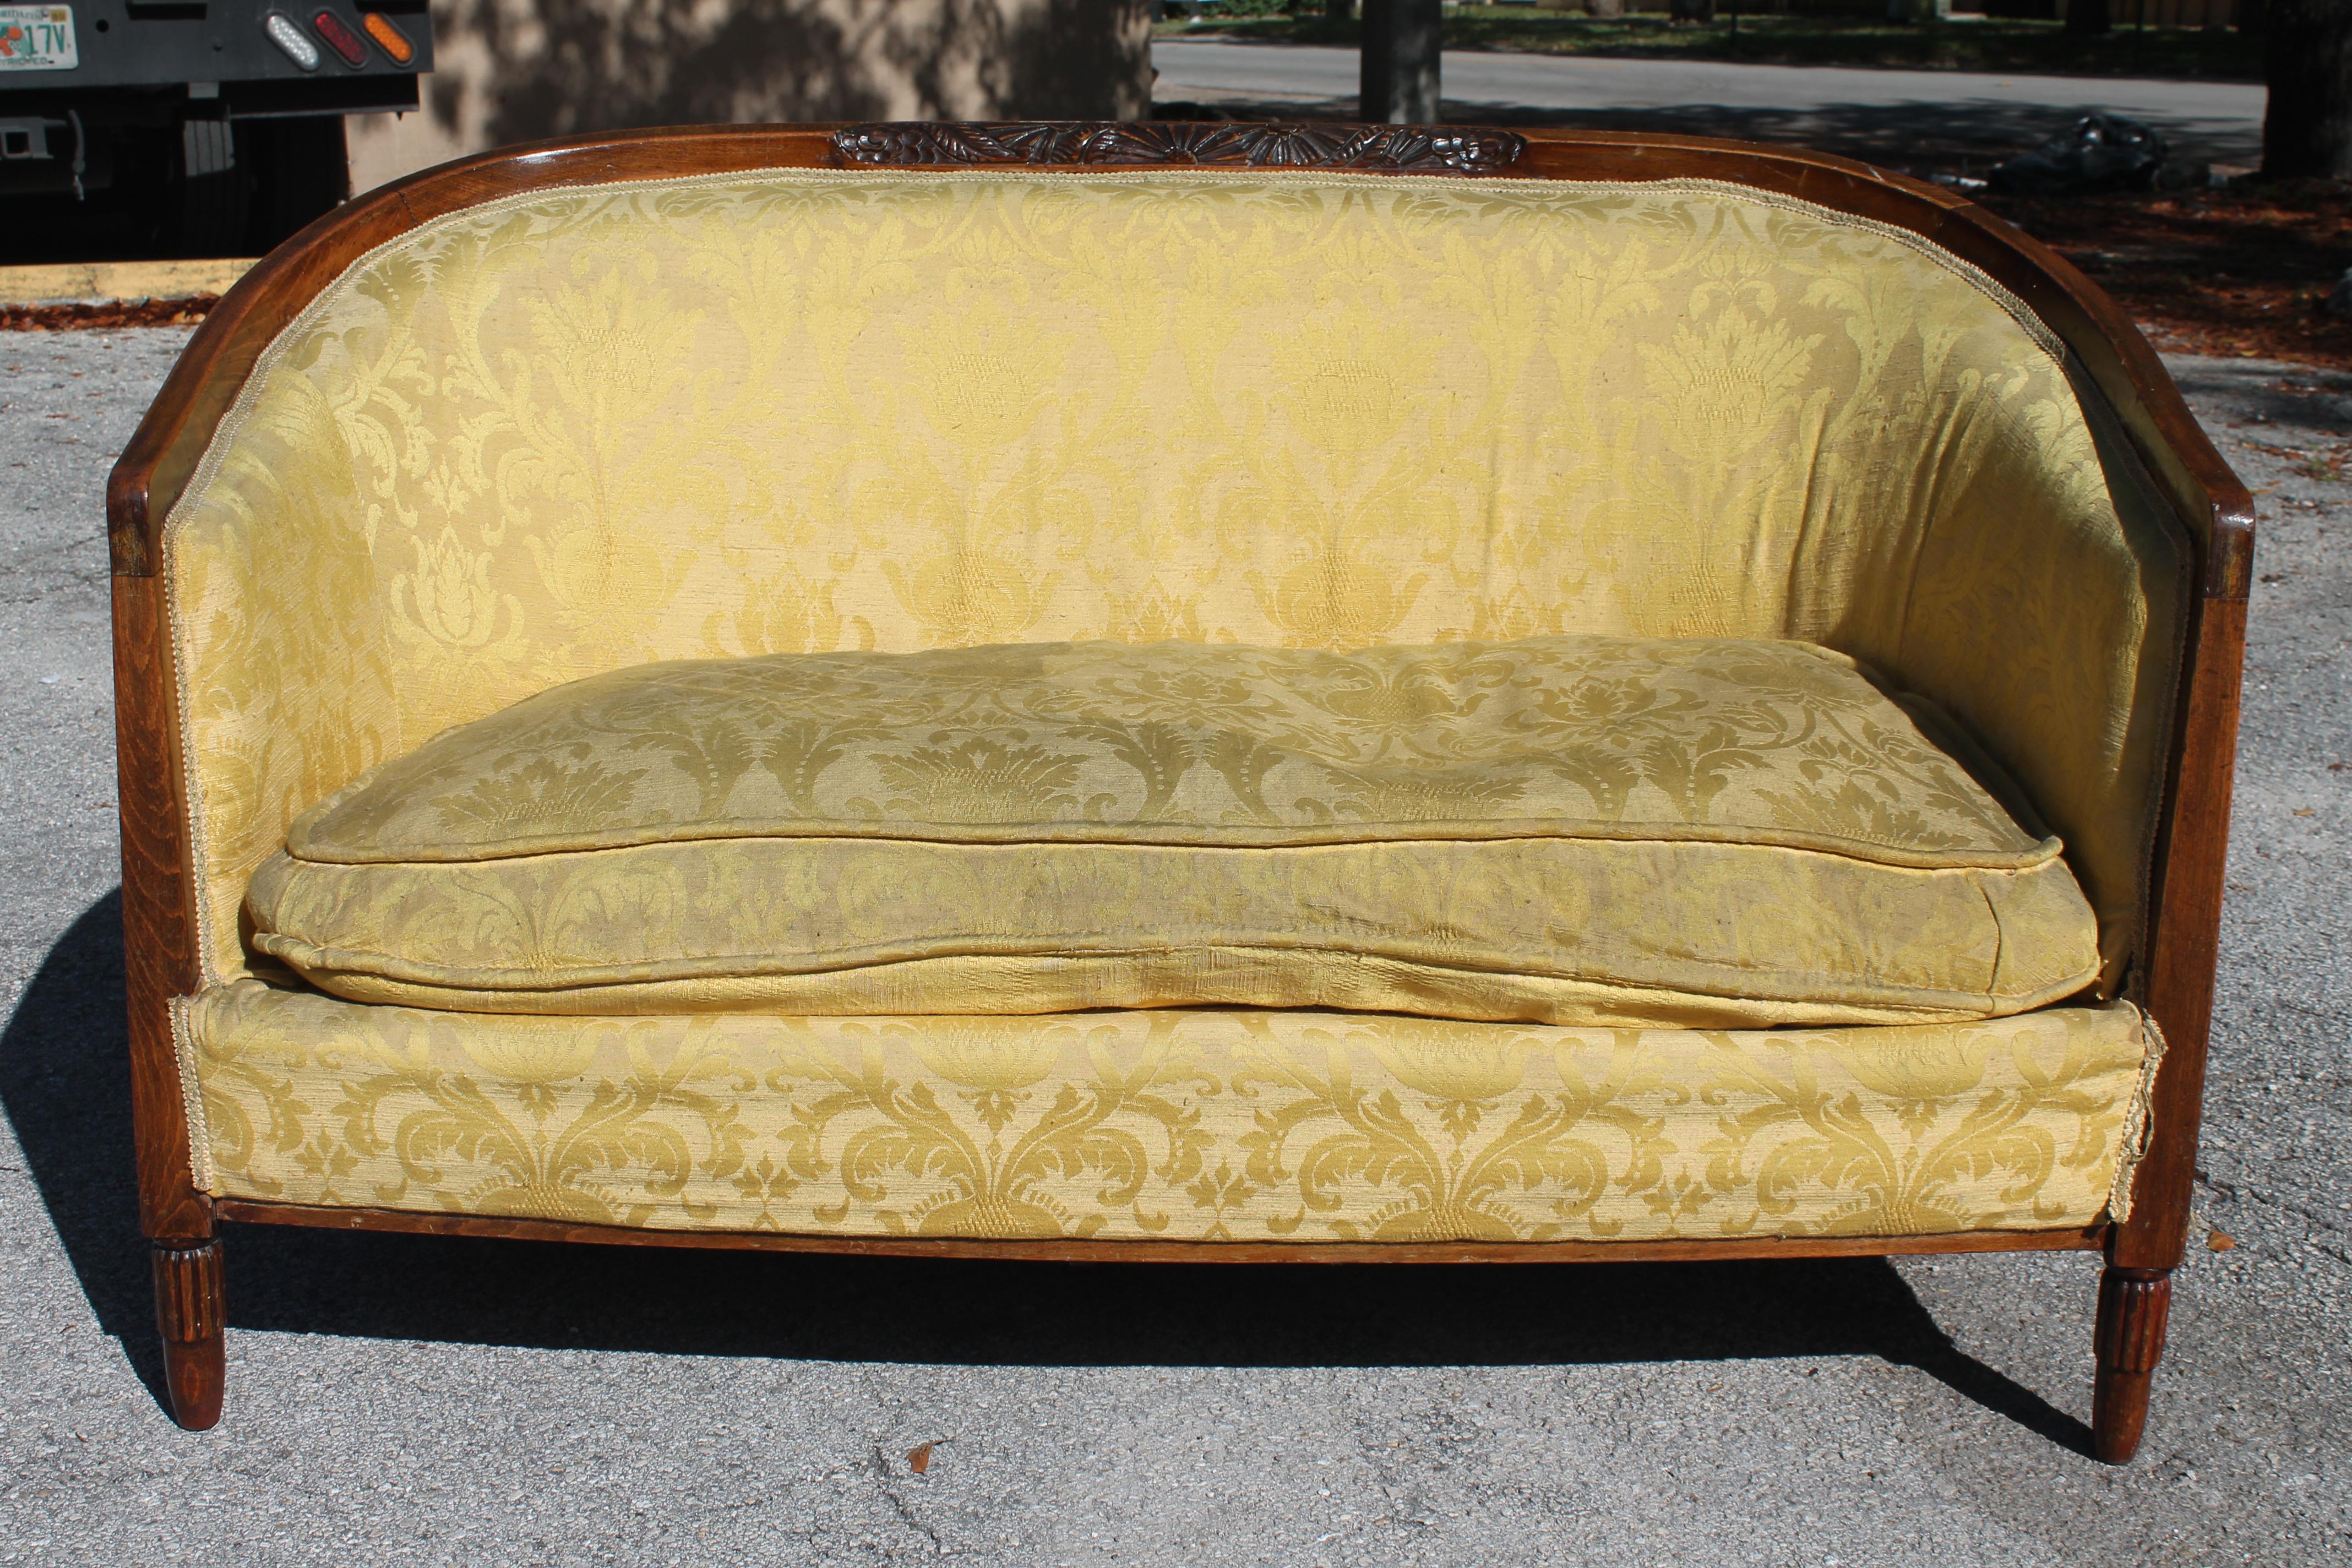 1930's Rare French Art Deco Carved Canape/ Sofa For Sale 7